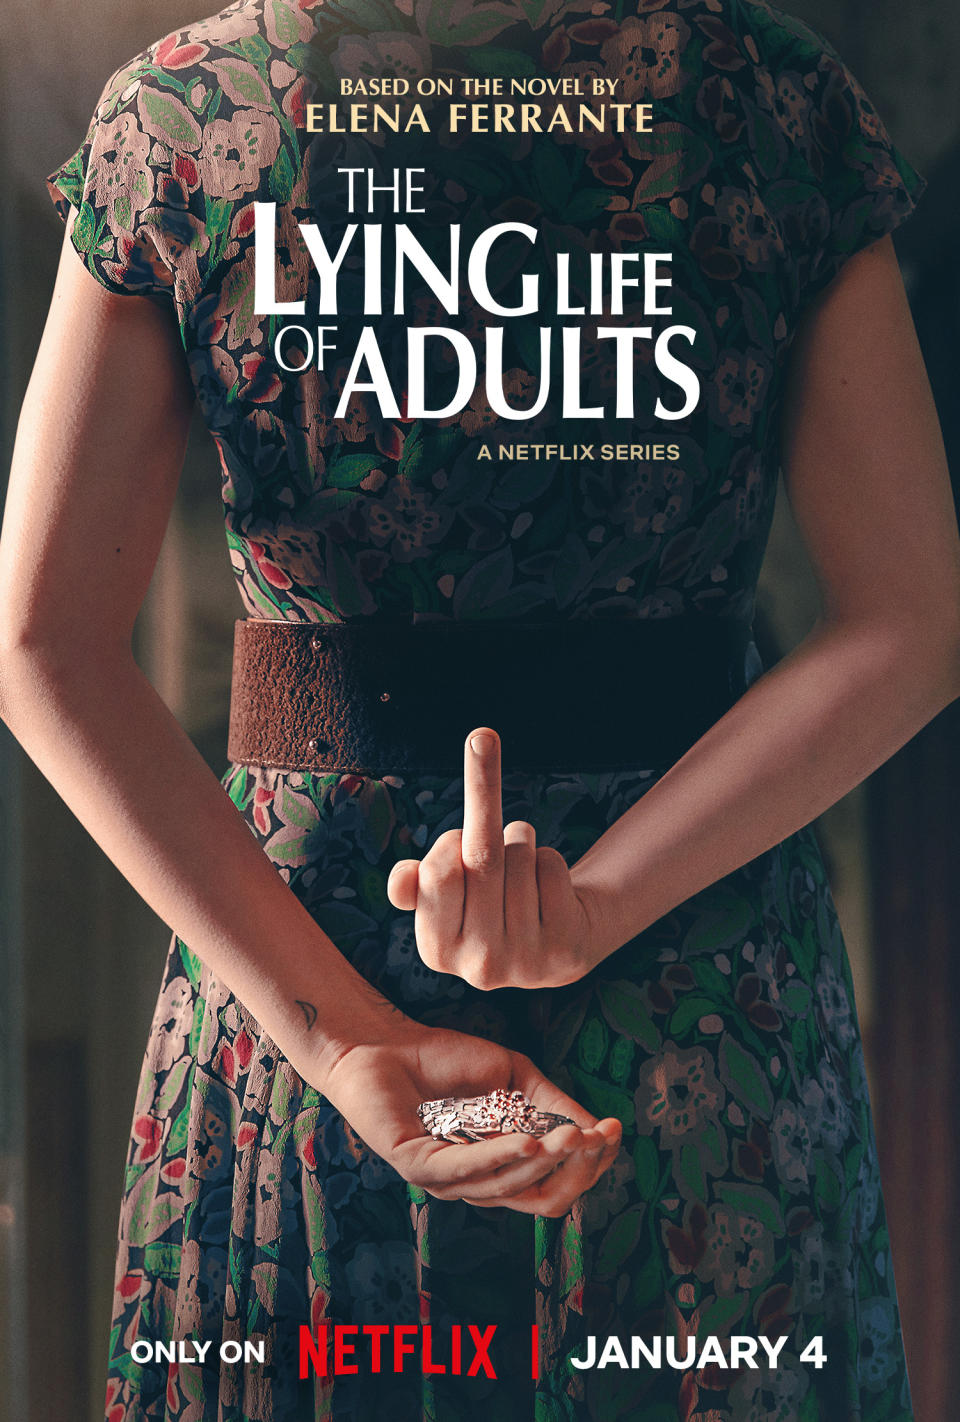 “The Lying Life of Adults”